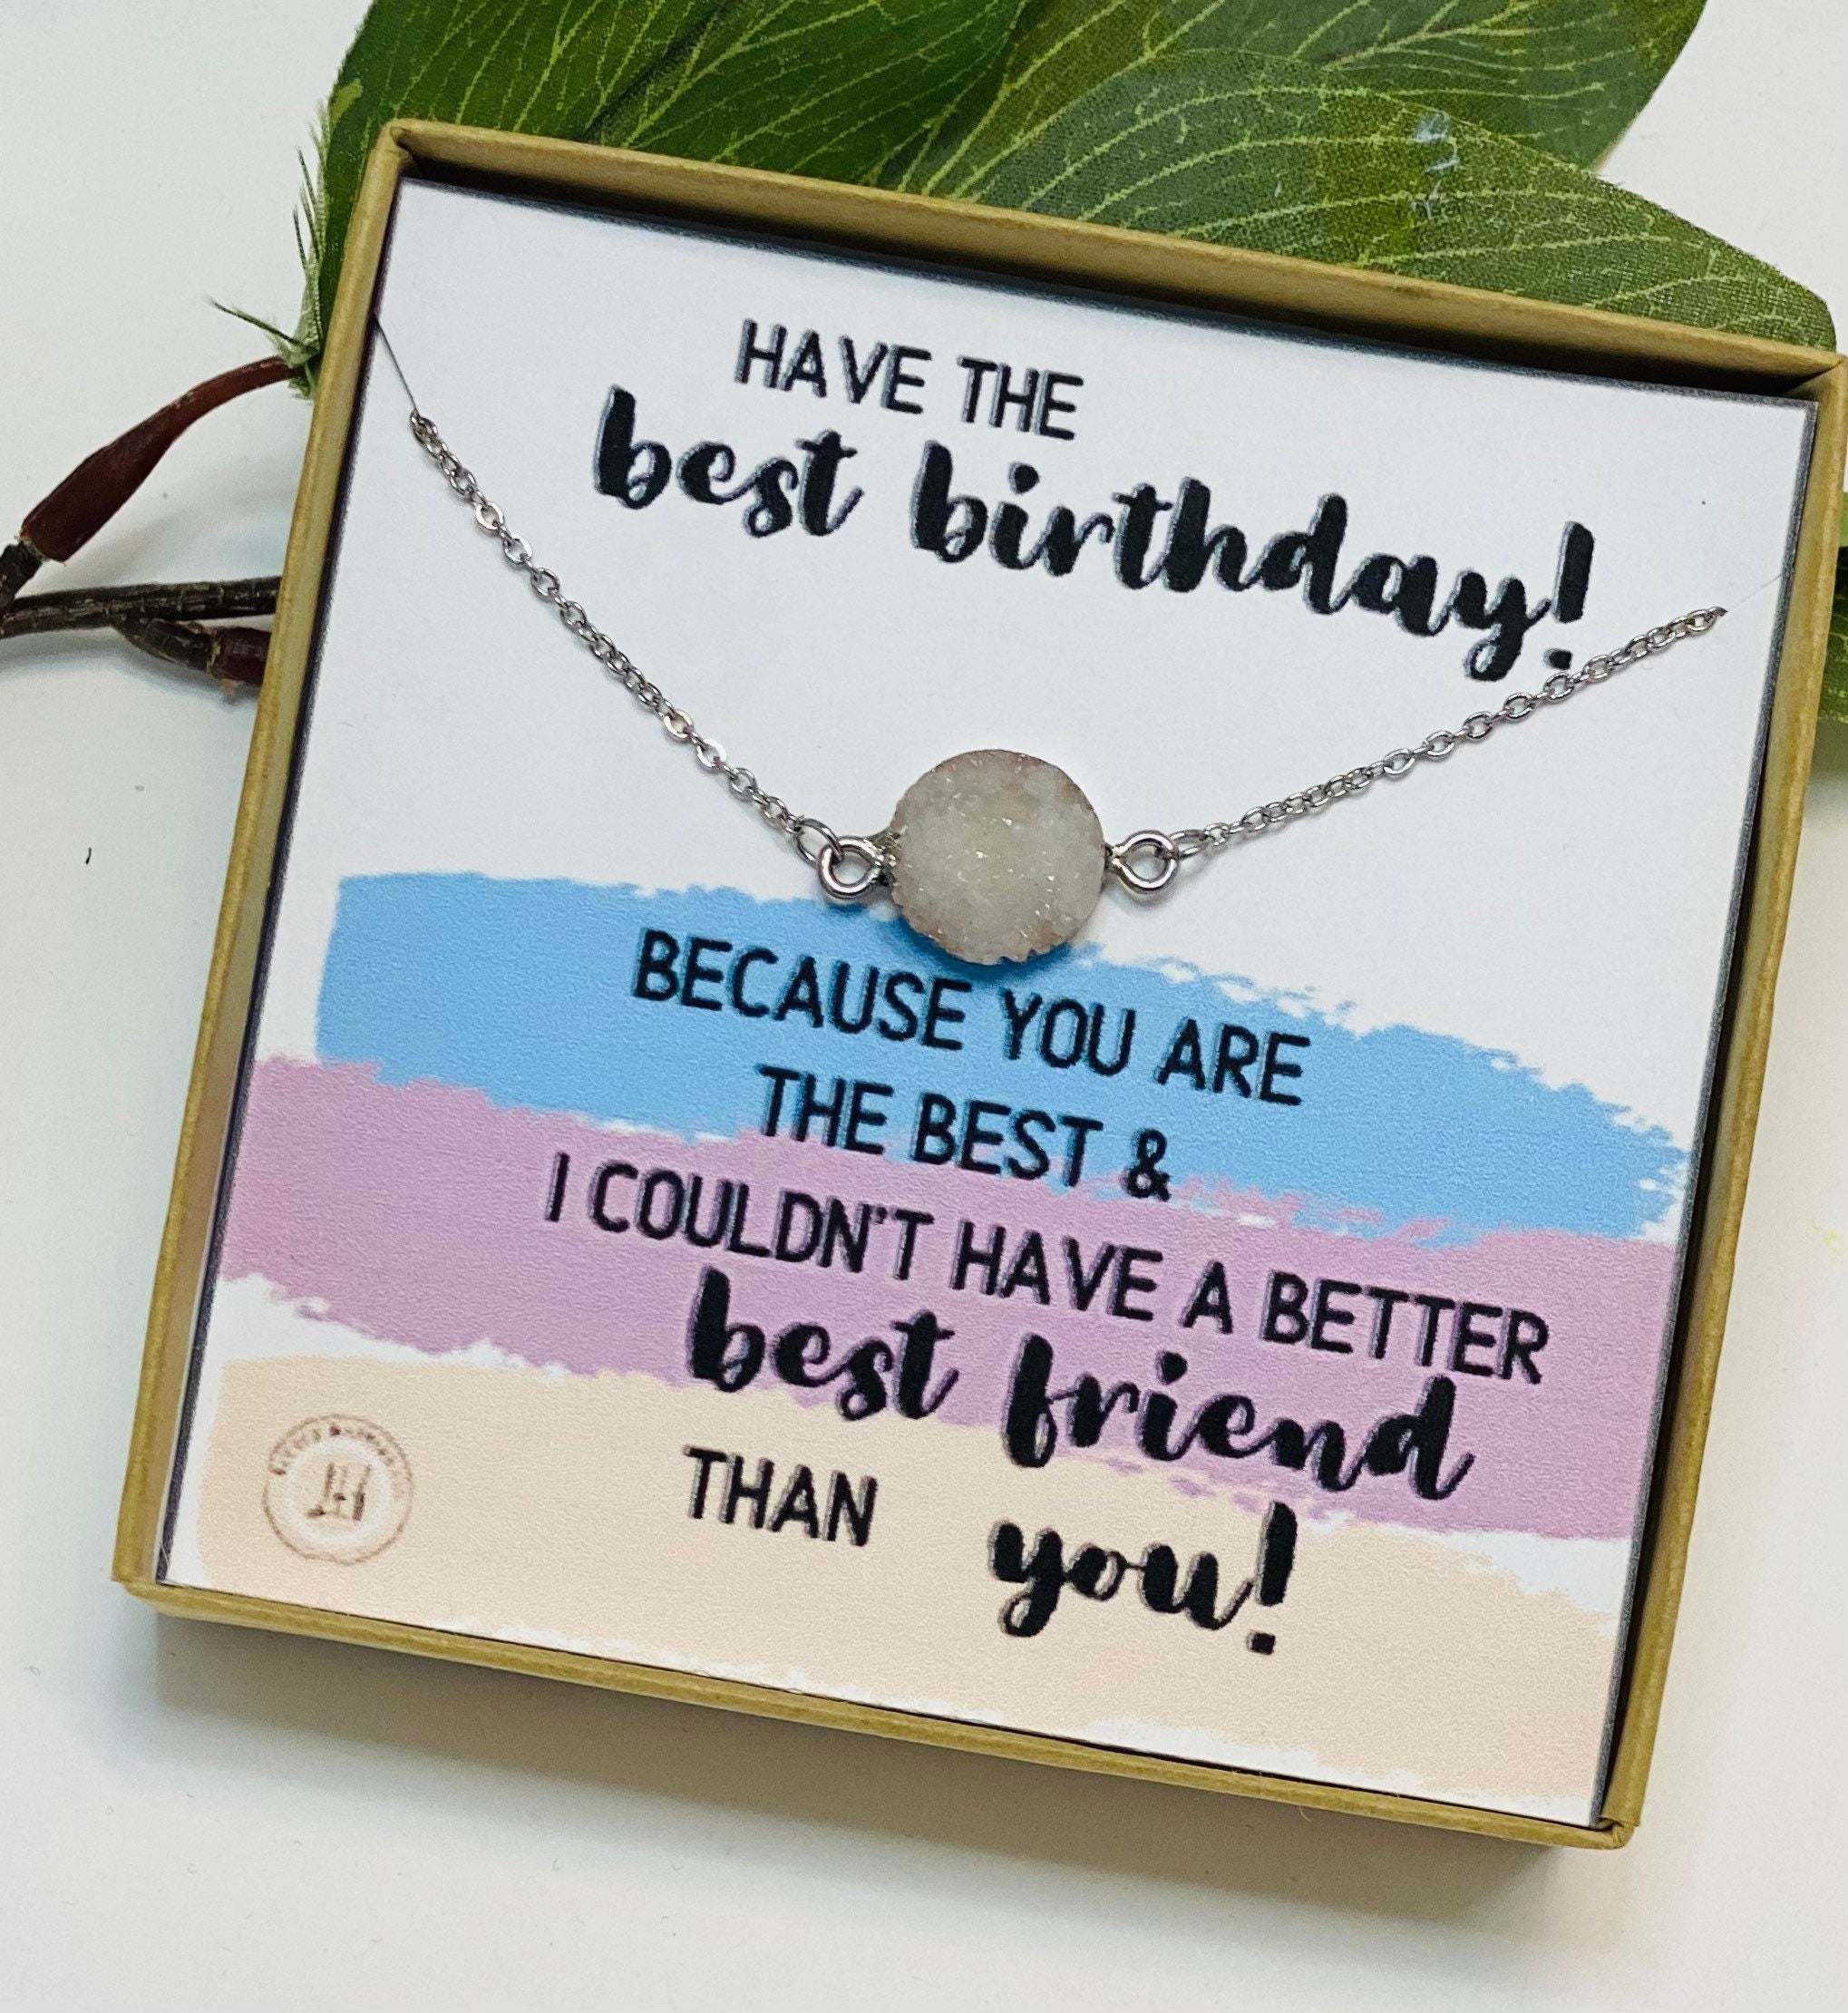 Birthday Gifts For Friend: 6 Birthday Gifts for a Friend: Surprise your  friend with the best birthday gift! - The Economic Times